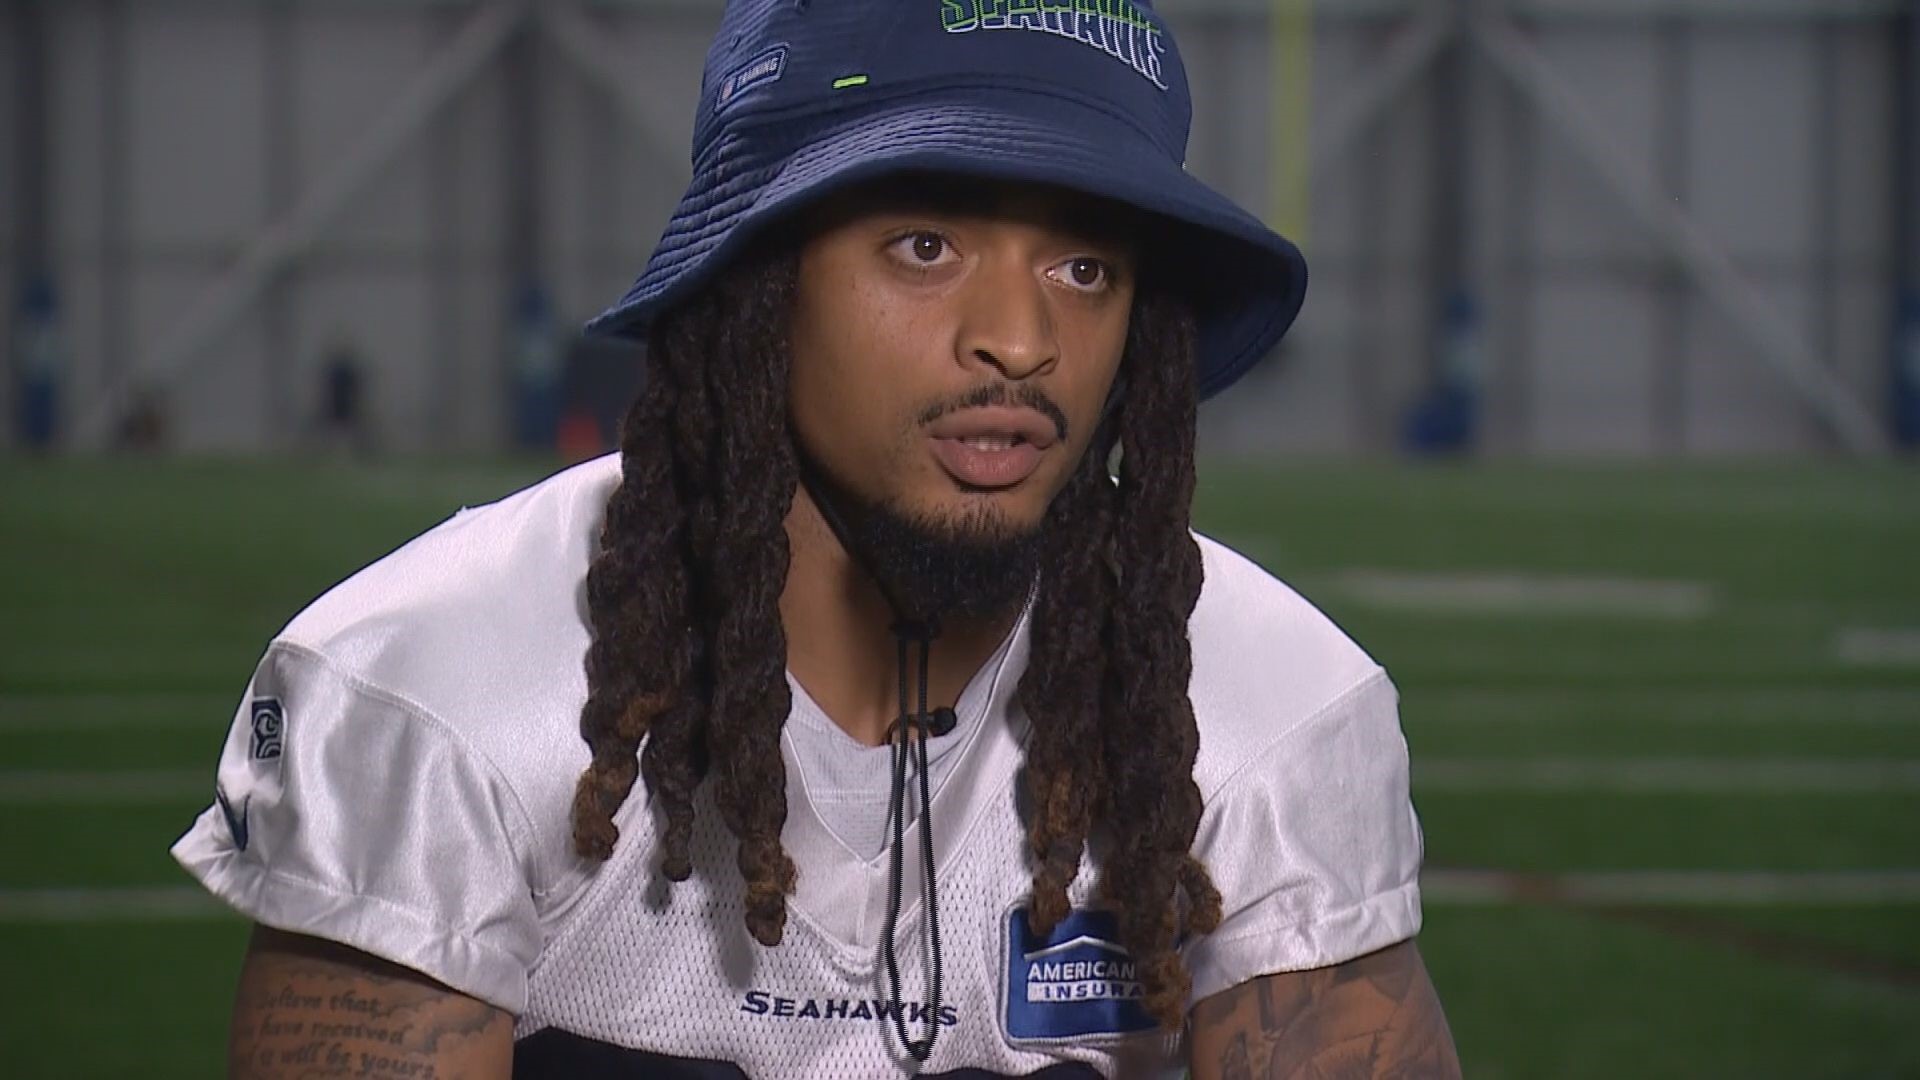 Seahawks cornerback Ryan Neal sits down with Paul Silvi to talk physicality, giving back through The NEAL Foundation and working as a groundskeeper in college.